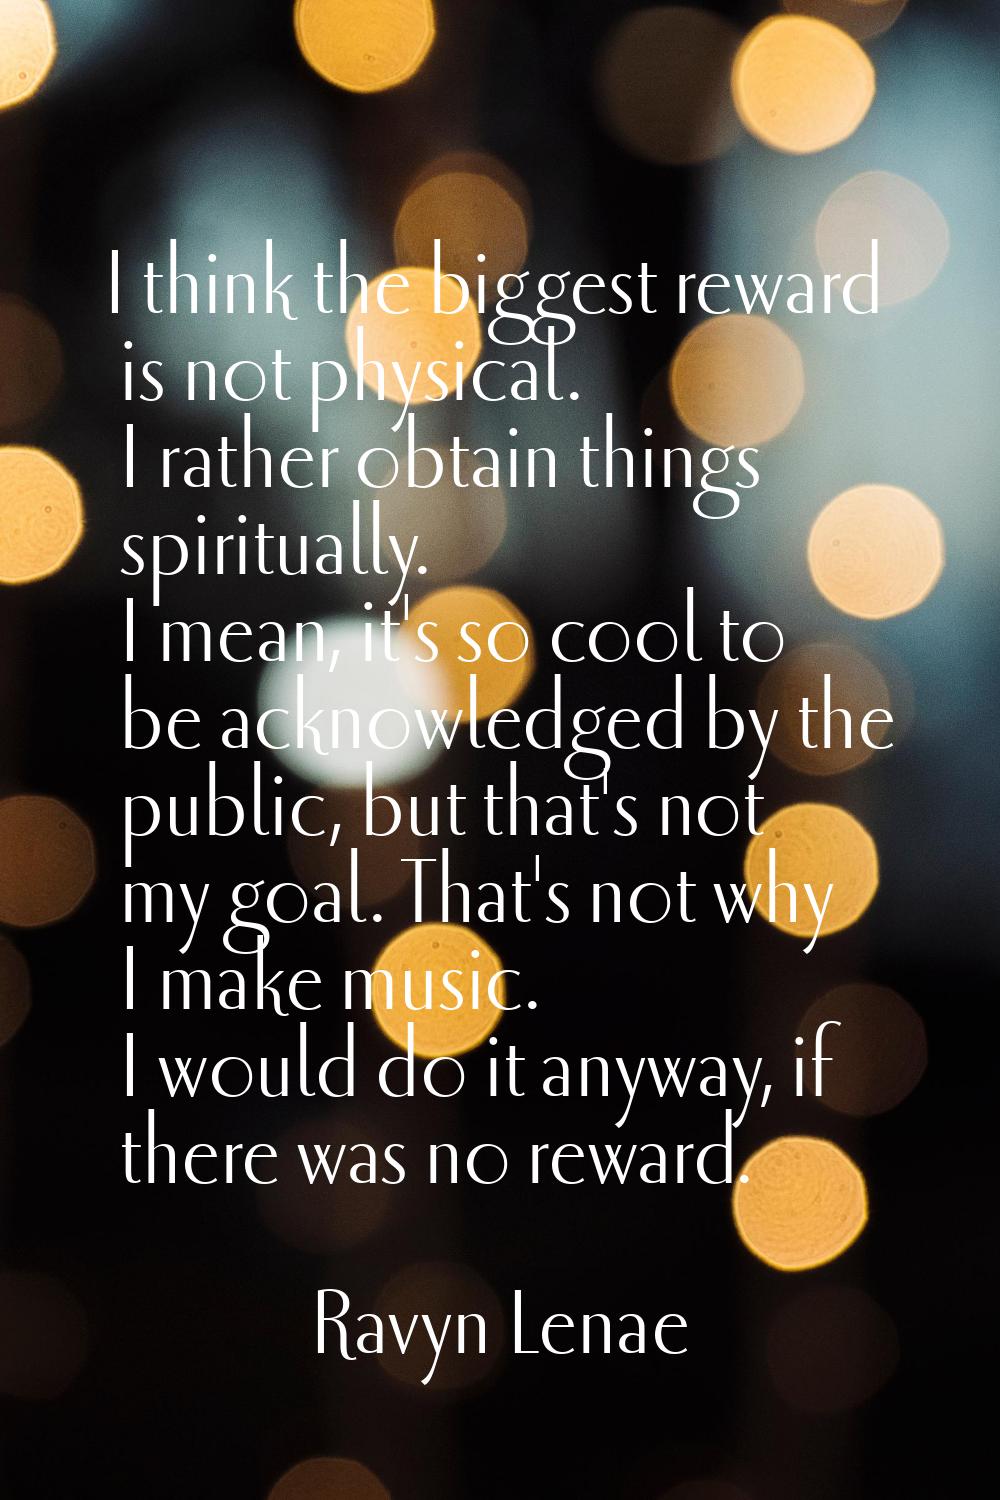 I think the biggest reward is not physical. I rather obtain things spiritually. I mean, it's so coo